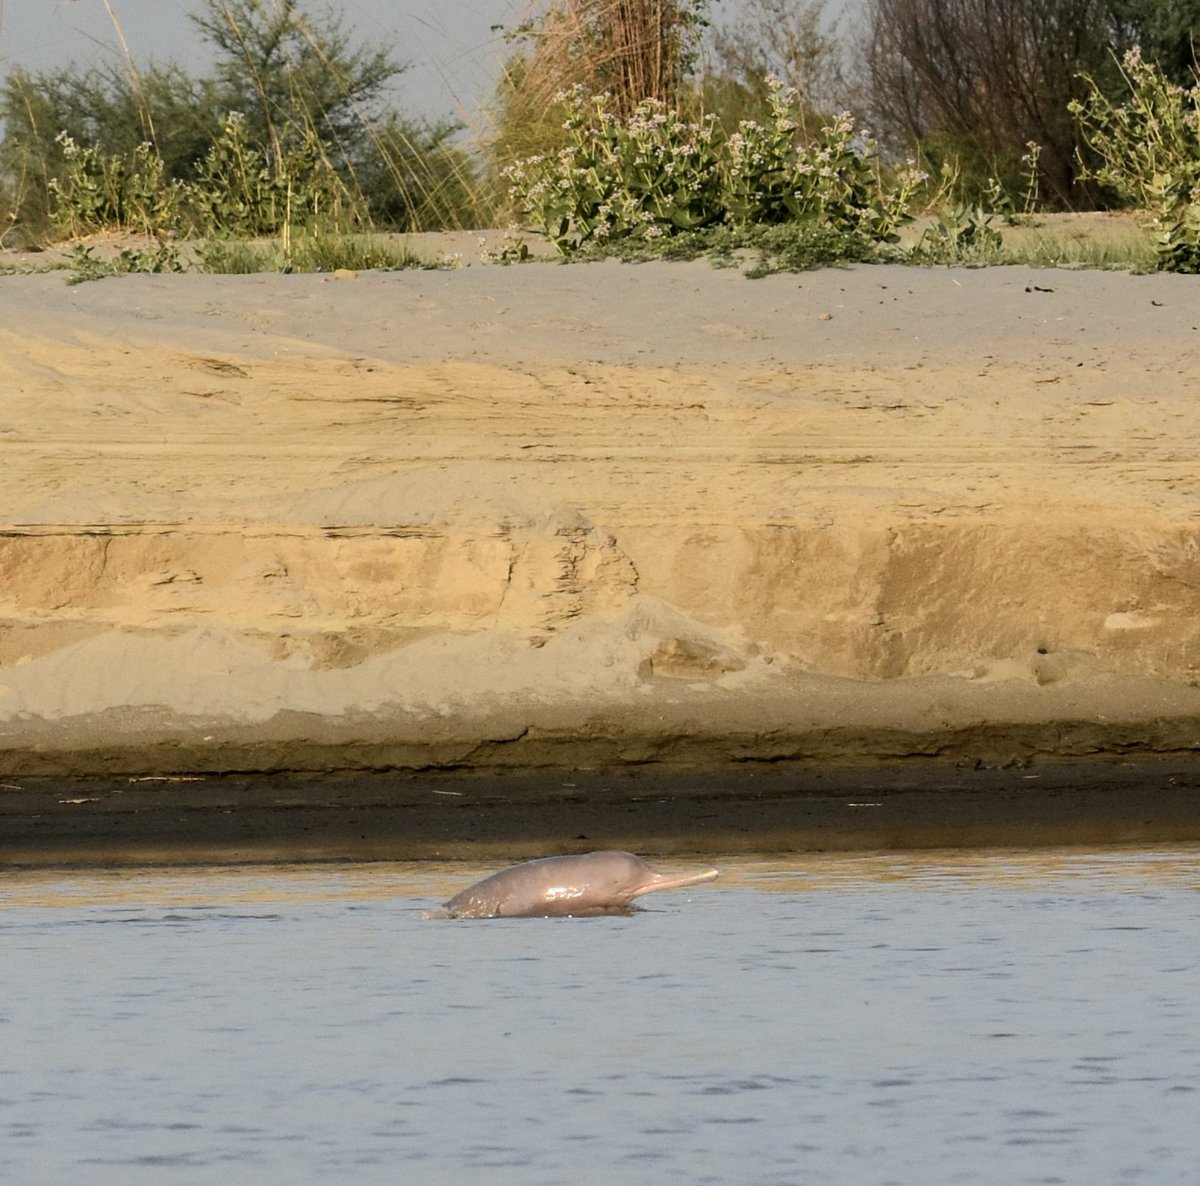 Sharing one of nature's most innocent & playful creatures - Blind Indus Dolphin clicked early morning today at River Indus, somewhere in South Punjab - can't miss childish glee & smile of this joyful Dolphin - also you can see its rudimentary eye